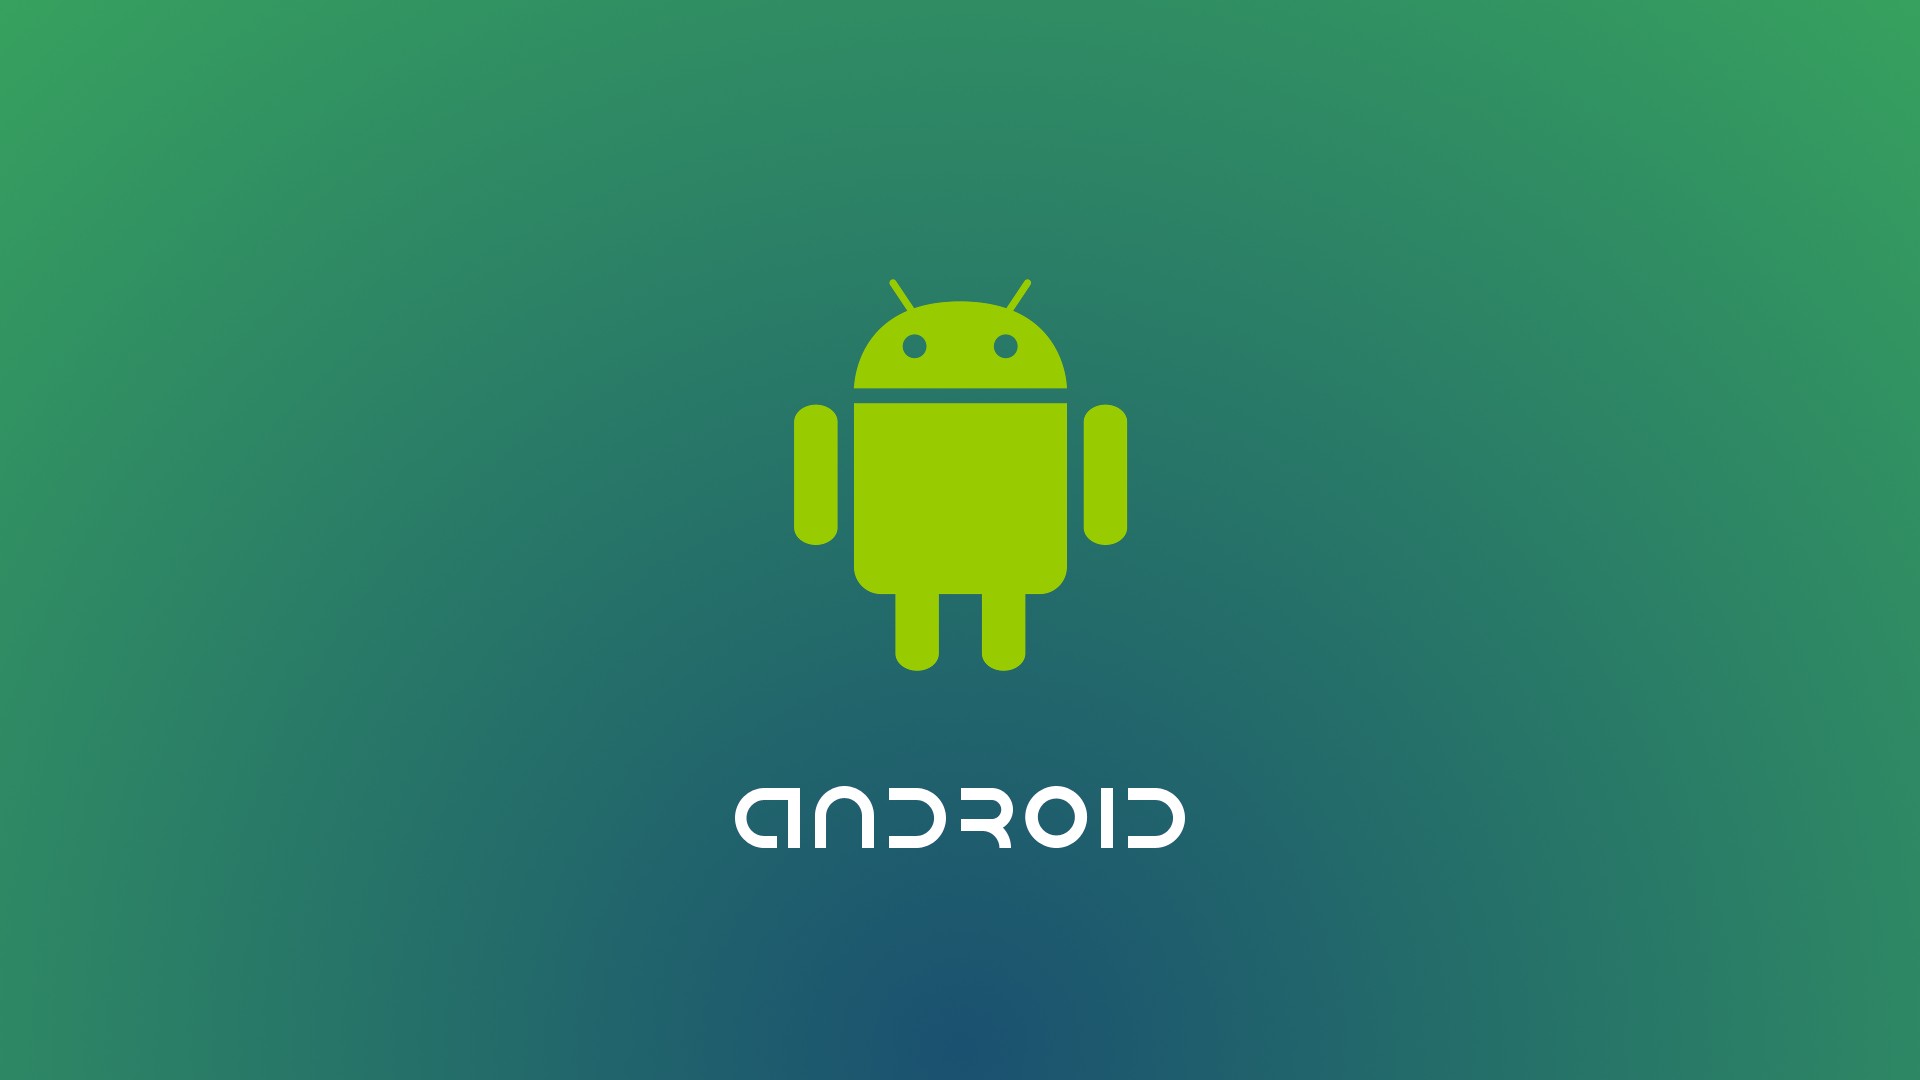 Android (operating system), Blurred Wallpaper